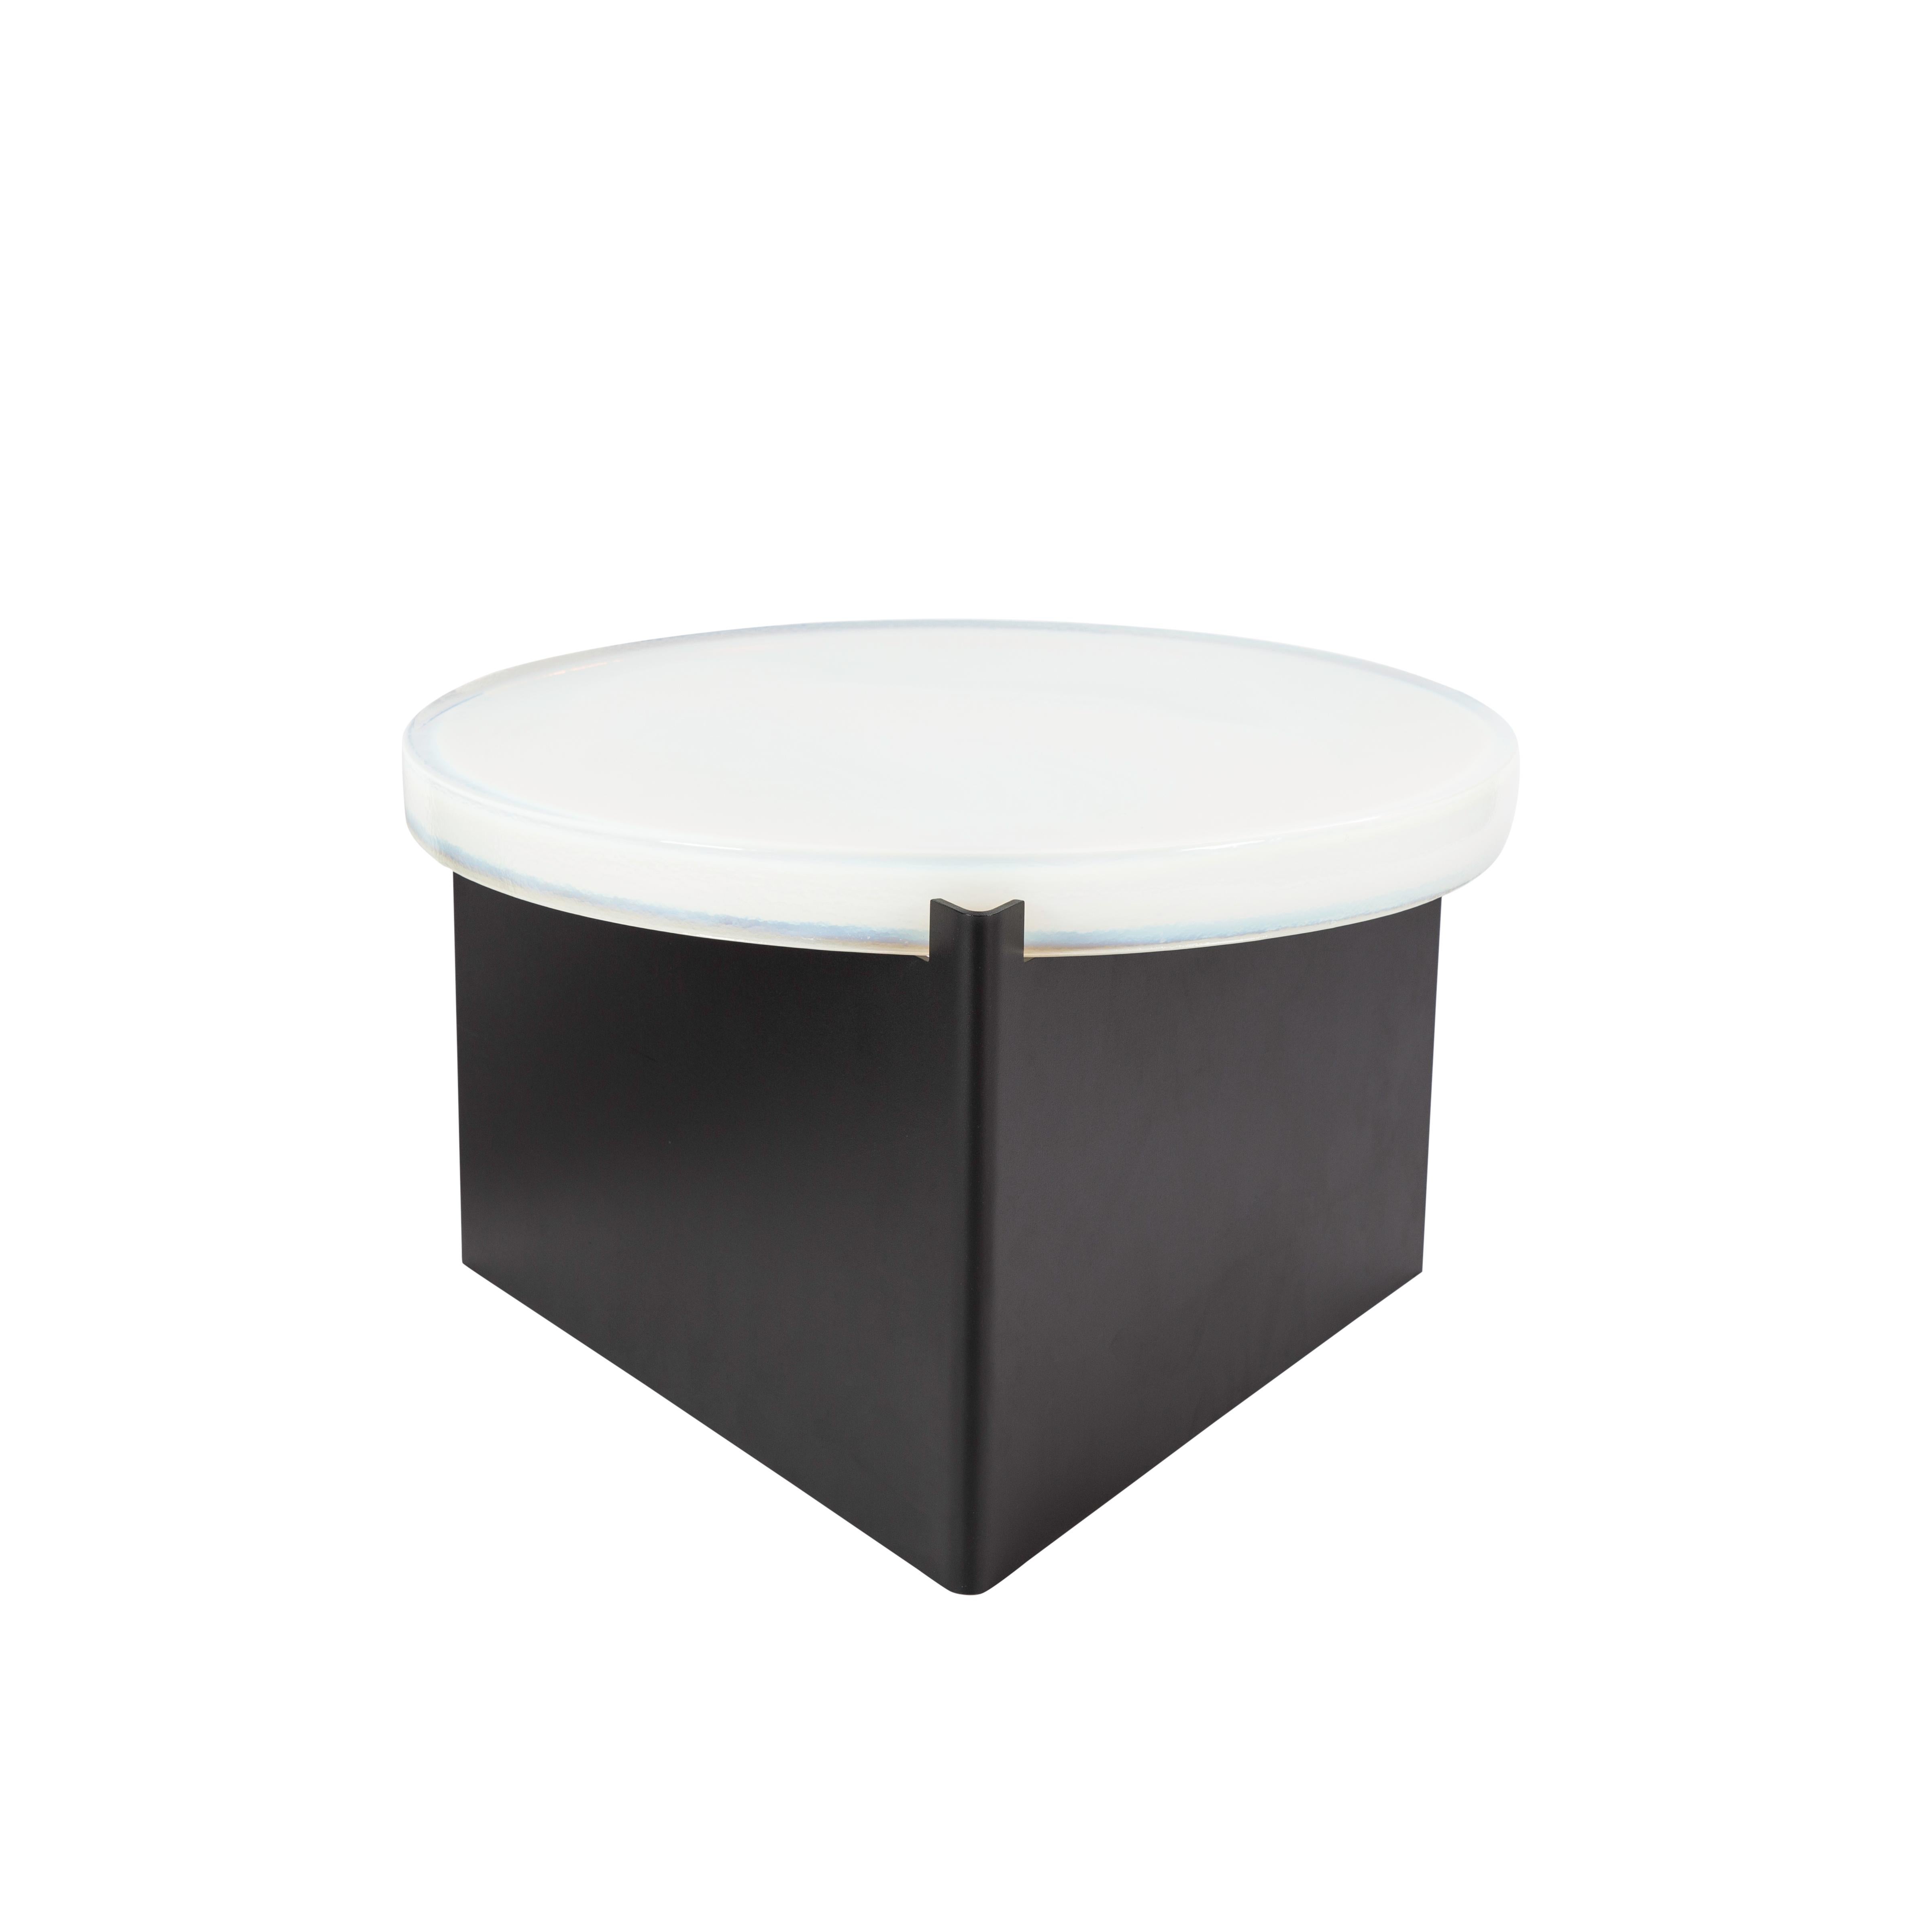 Alwa one big white black coffee table by Pulpo
Dimensions: D56 x H35 cm
Materials: casted glass; powder coated steel 

Also available in different finishes. 

Normally, glass is regarded as being lightweight with sharp edges. In contrast,